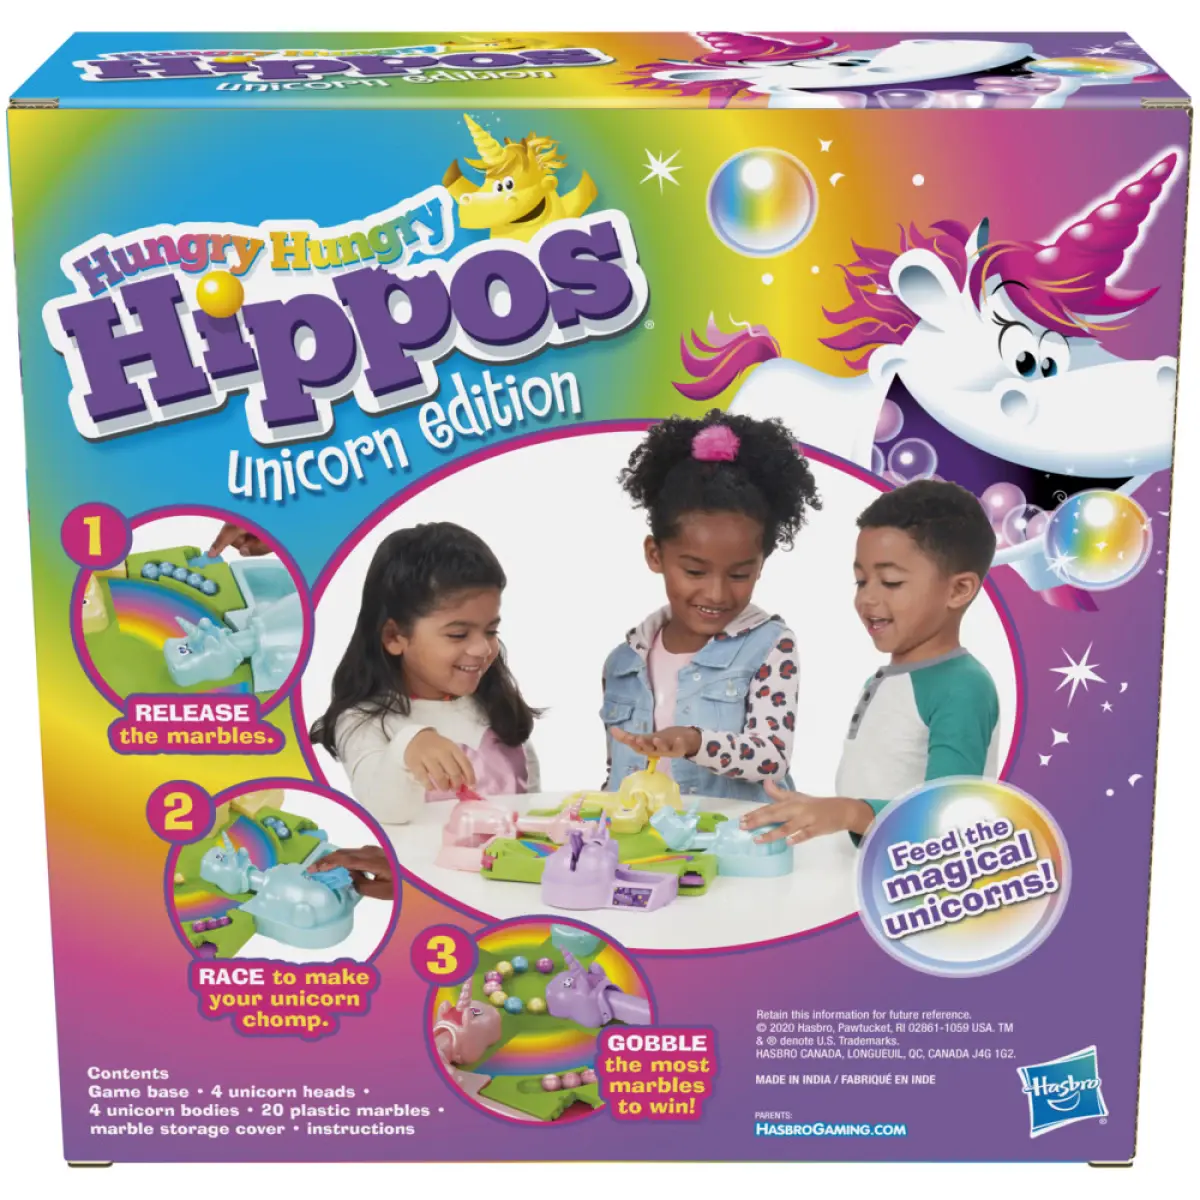 Hungry Hungry Hippos Unicorn Edition Board Game For Kids, Preschool Games For Kids Ages 4 And Up, Kids Games For 2 To 4 Players